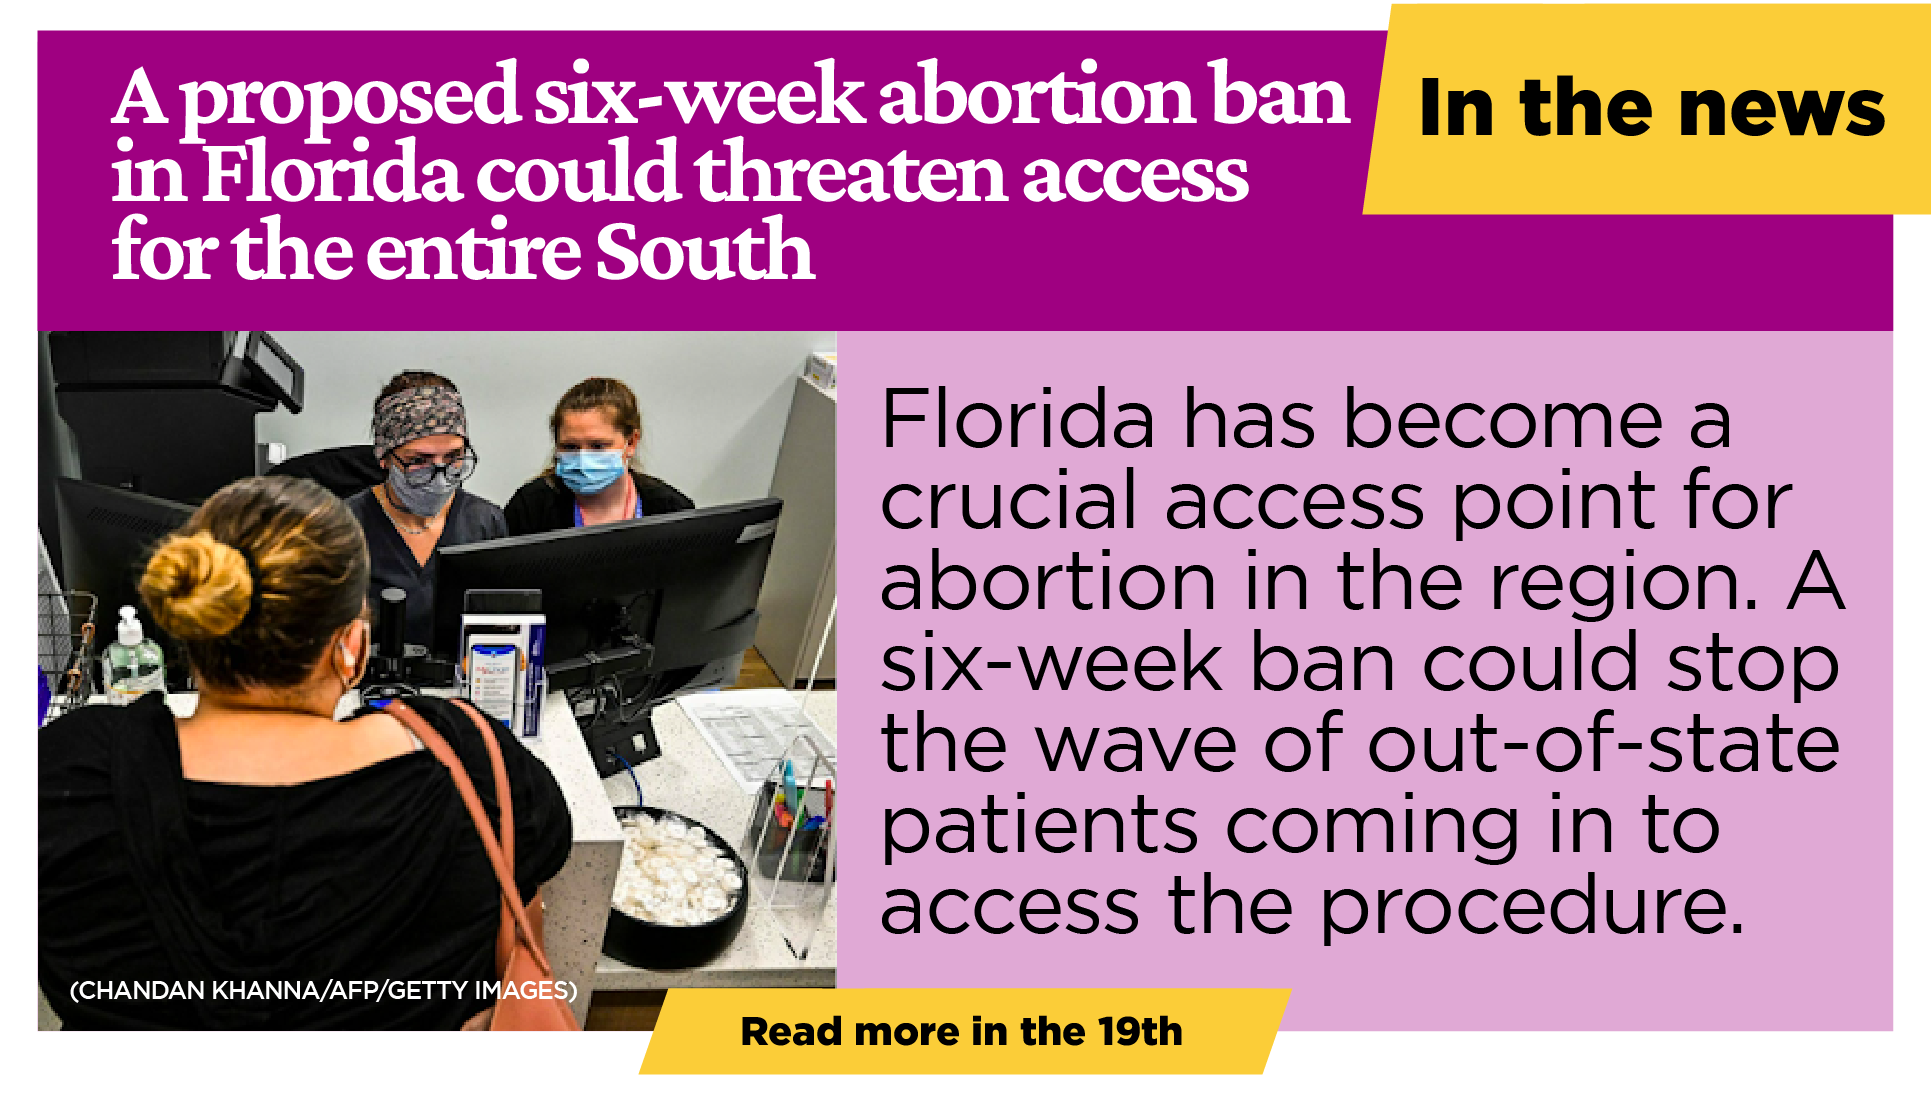 In the news:  A proposed six-week abortion ban in Florida could threaten access for the entire South Florida has become a crucial access point for abortion in the region. A six-week ban could stop the wave of out-of-state patients coming in to access the procedure.